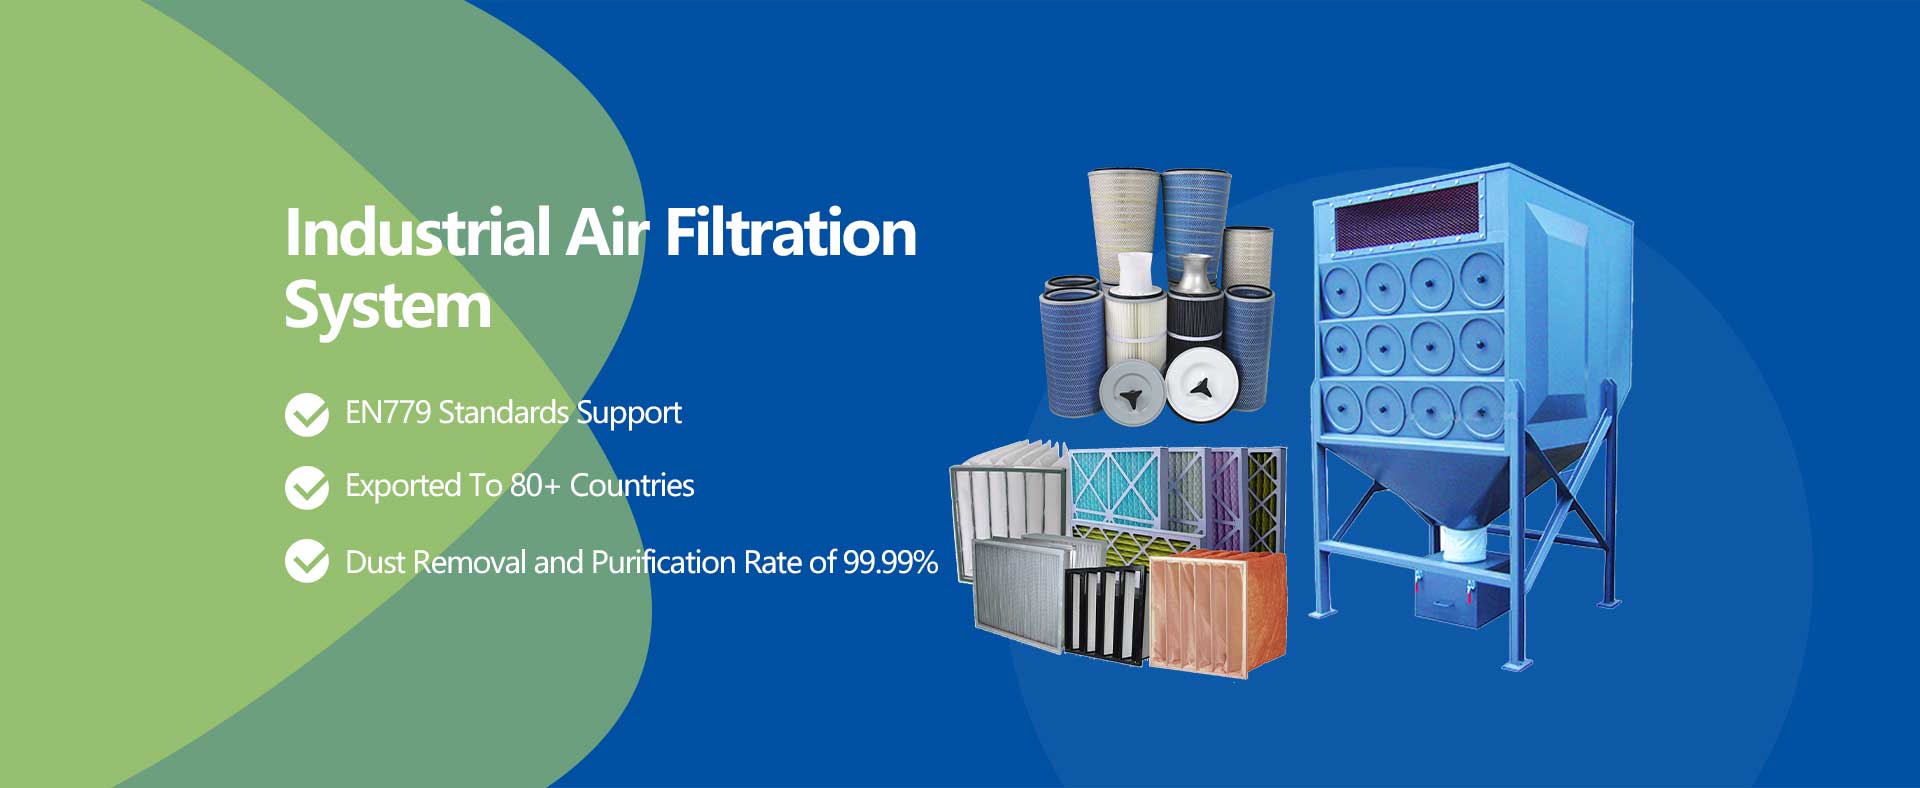 industrial air filtration system